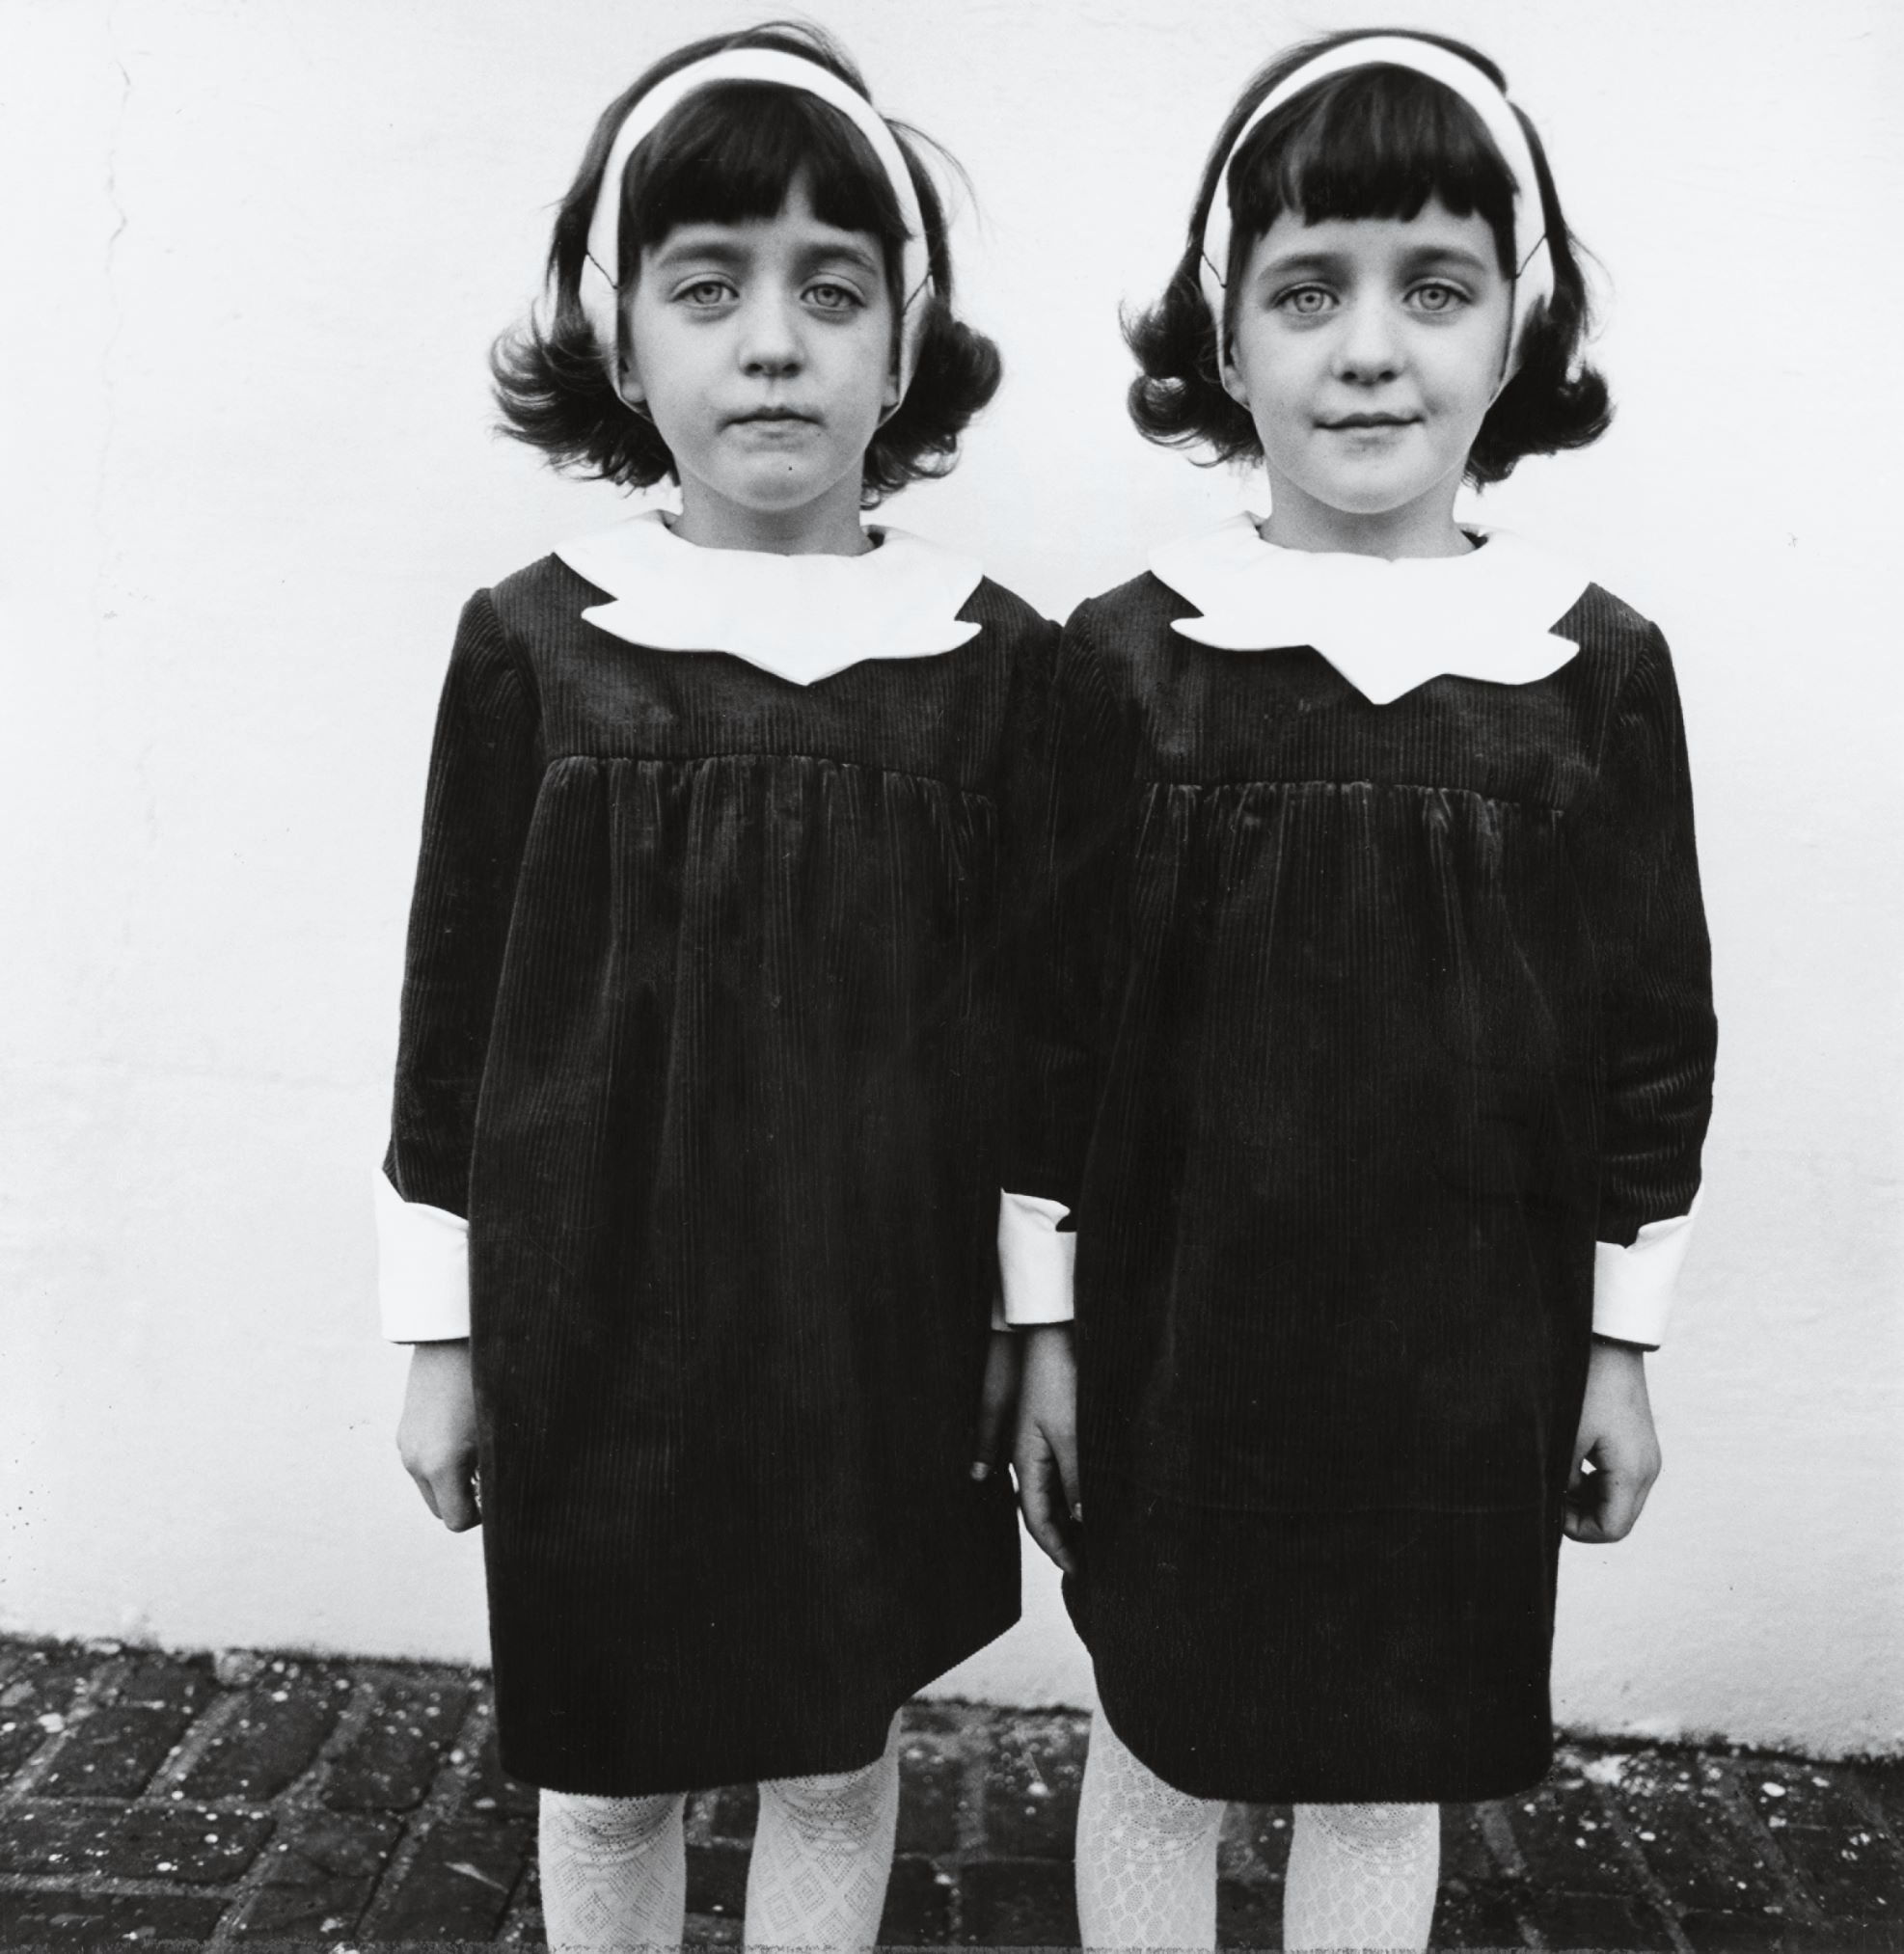 Identical twins, Roselle, NJ, 1966 by Diane Arbus